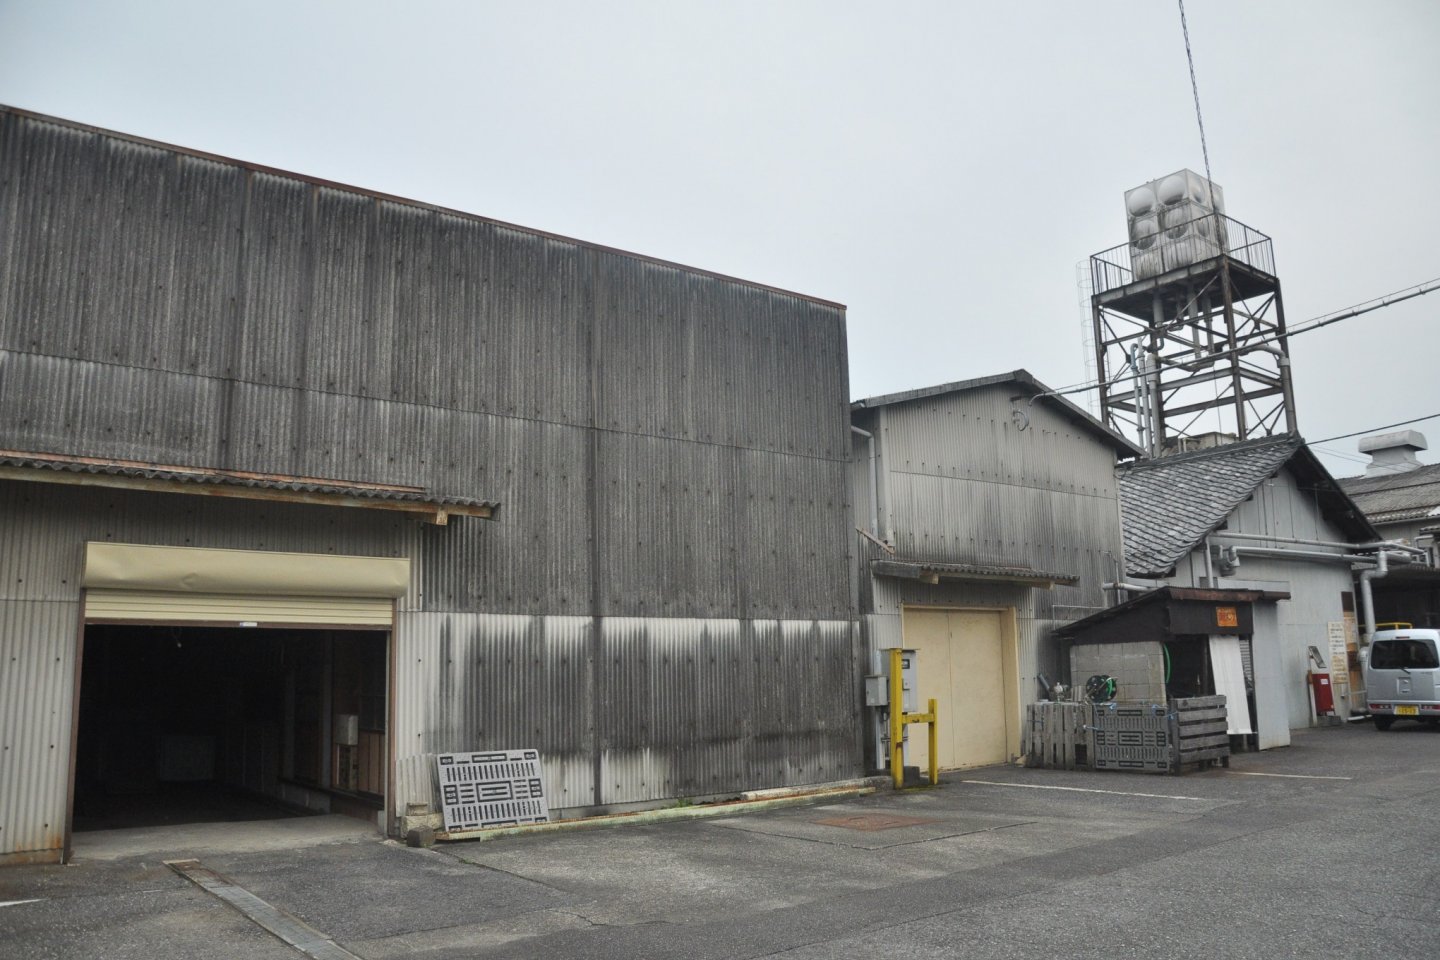 The factory is located in an unassuming building in Shiga Prefecture